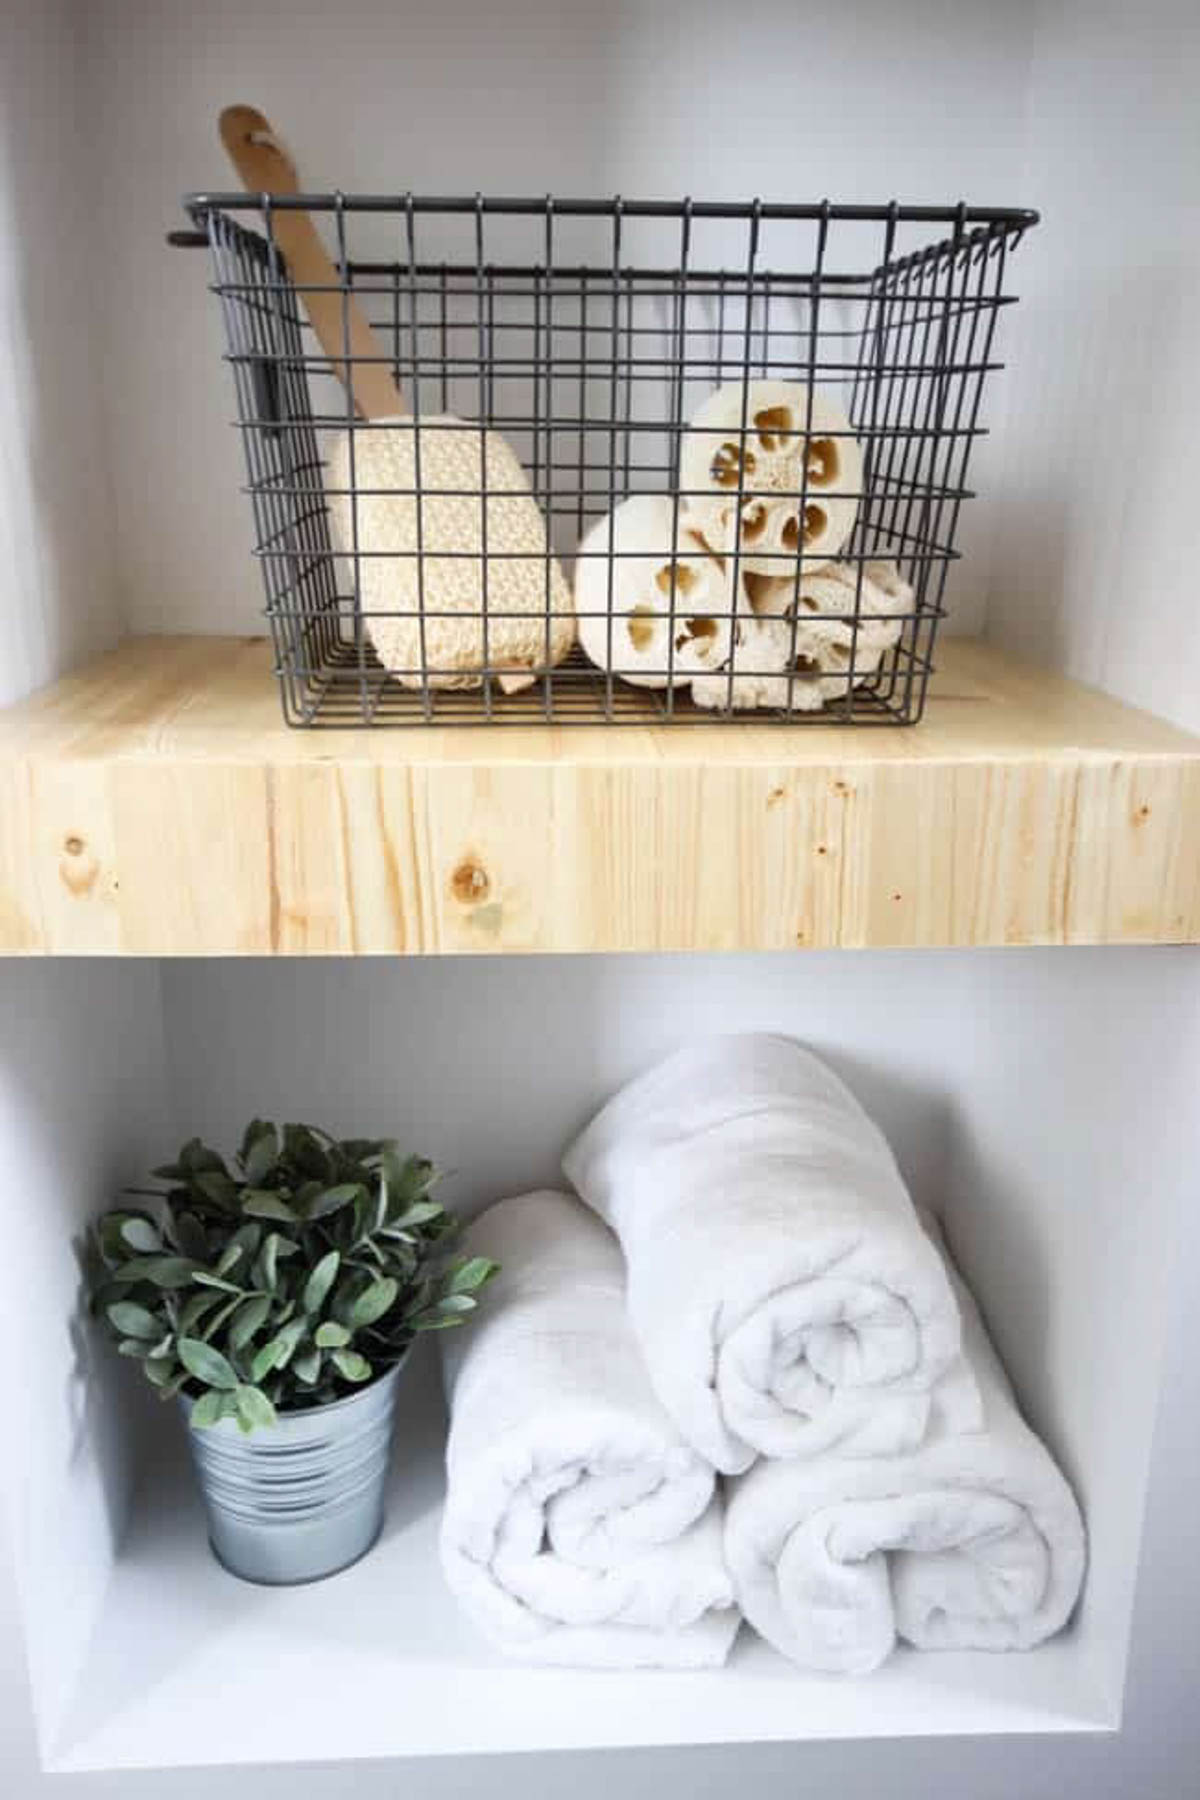 Decorated DIY built-in shelving in a bathroom